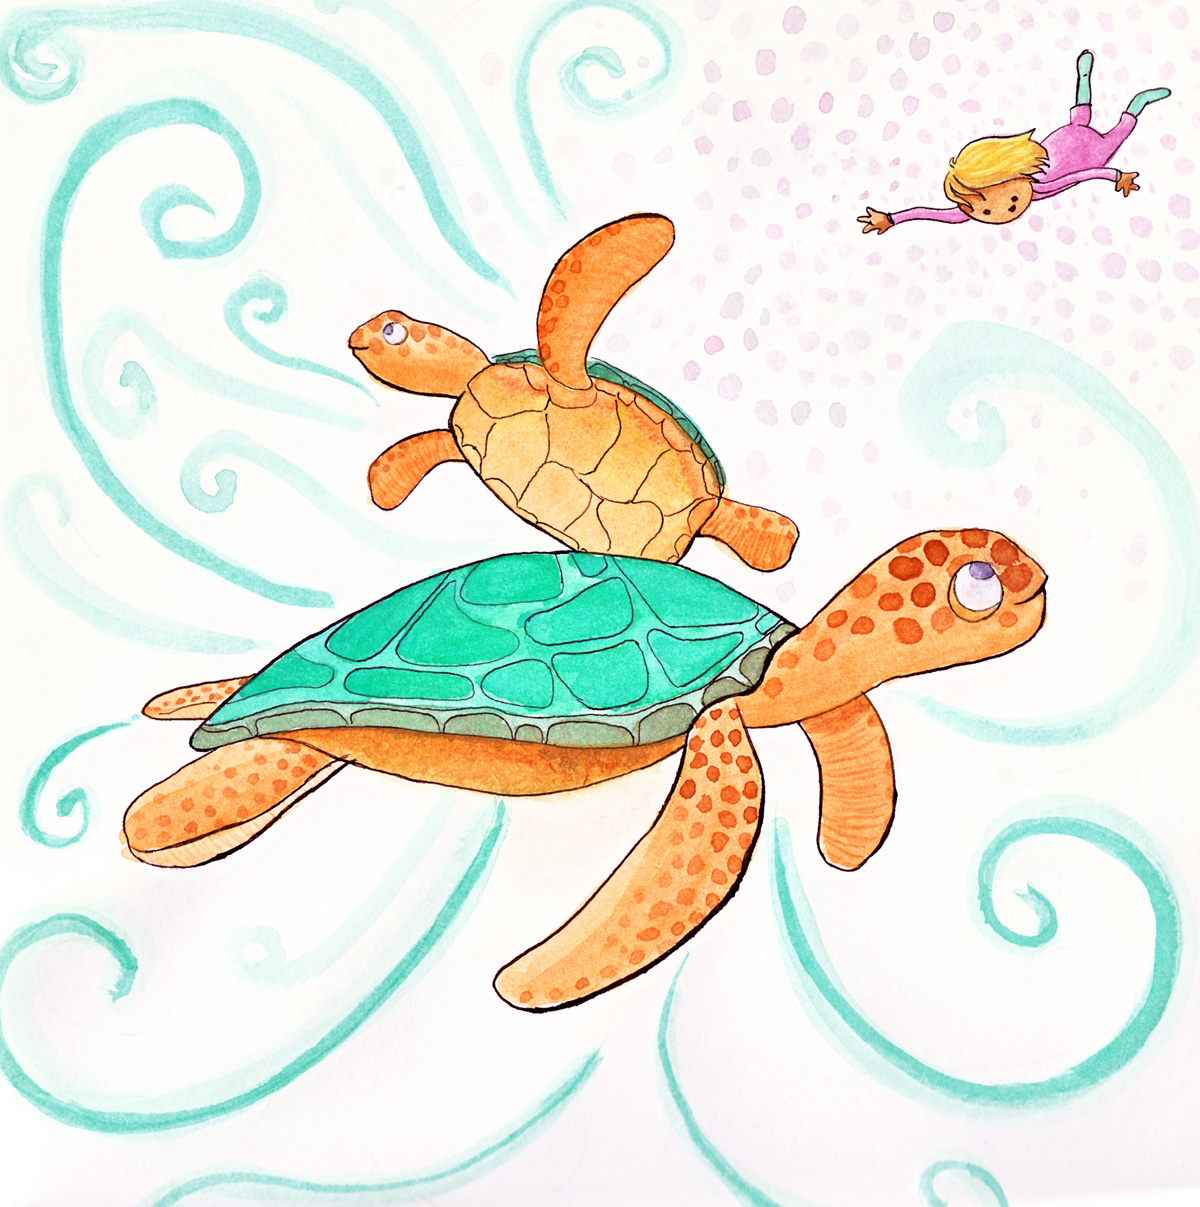 Sea turtle colored pencil drawing by me | available as prints on redbubble  : r/redbubble